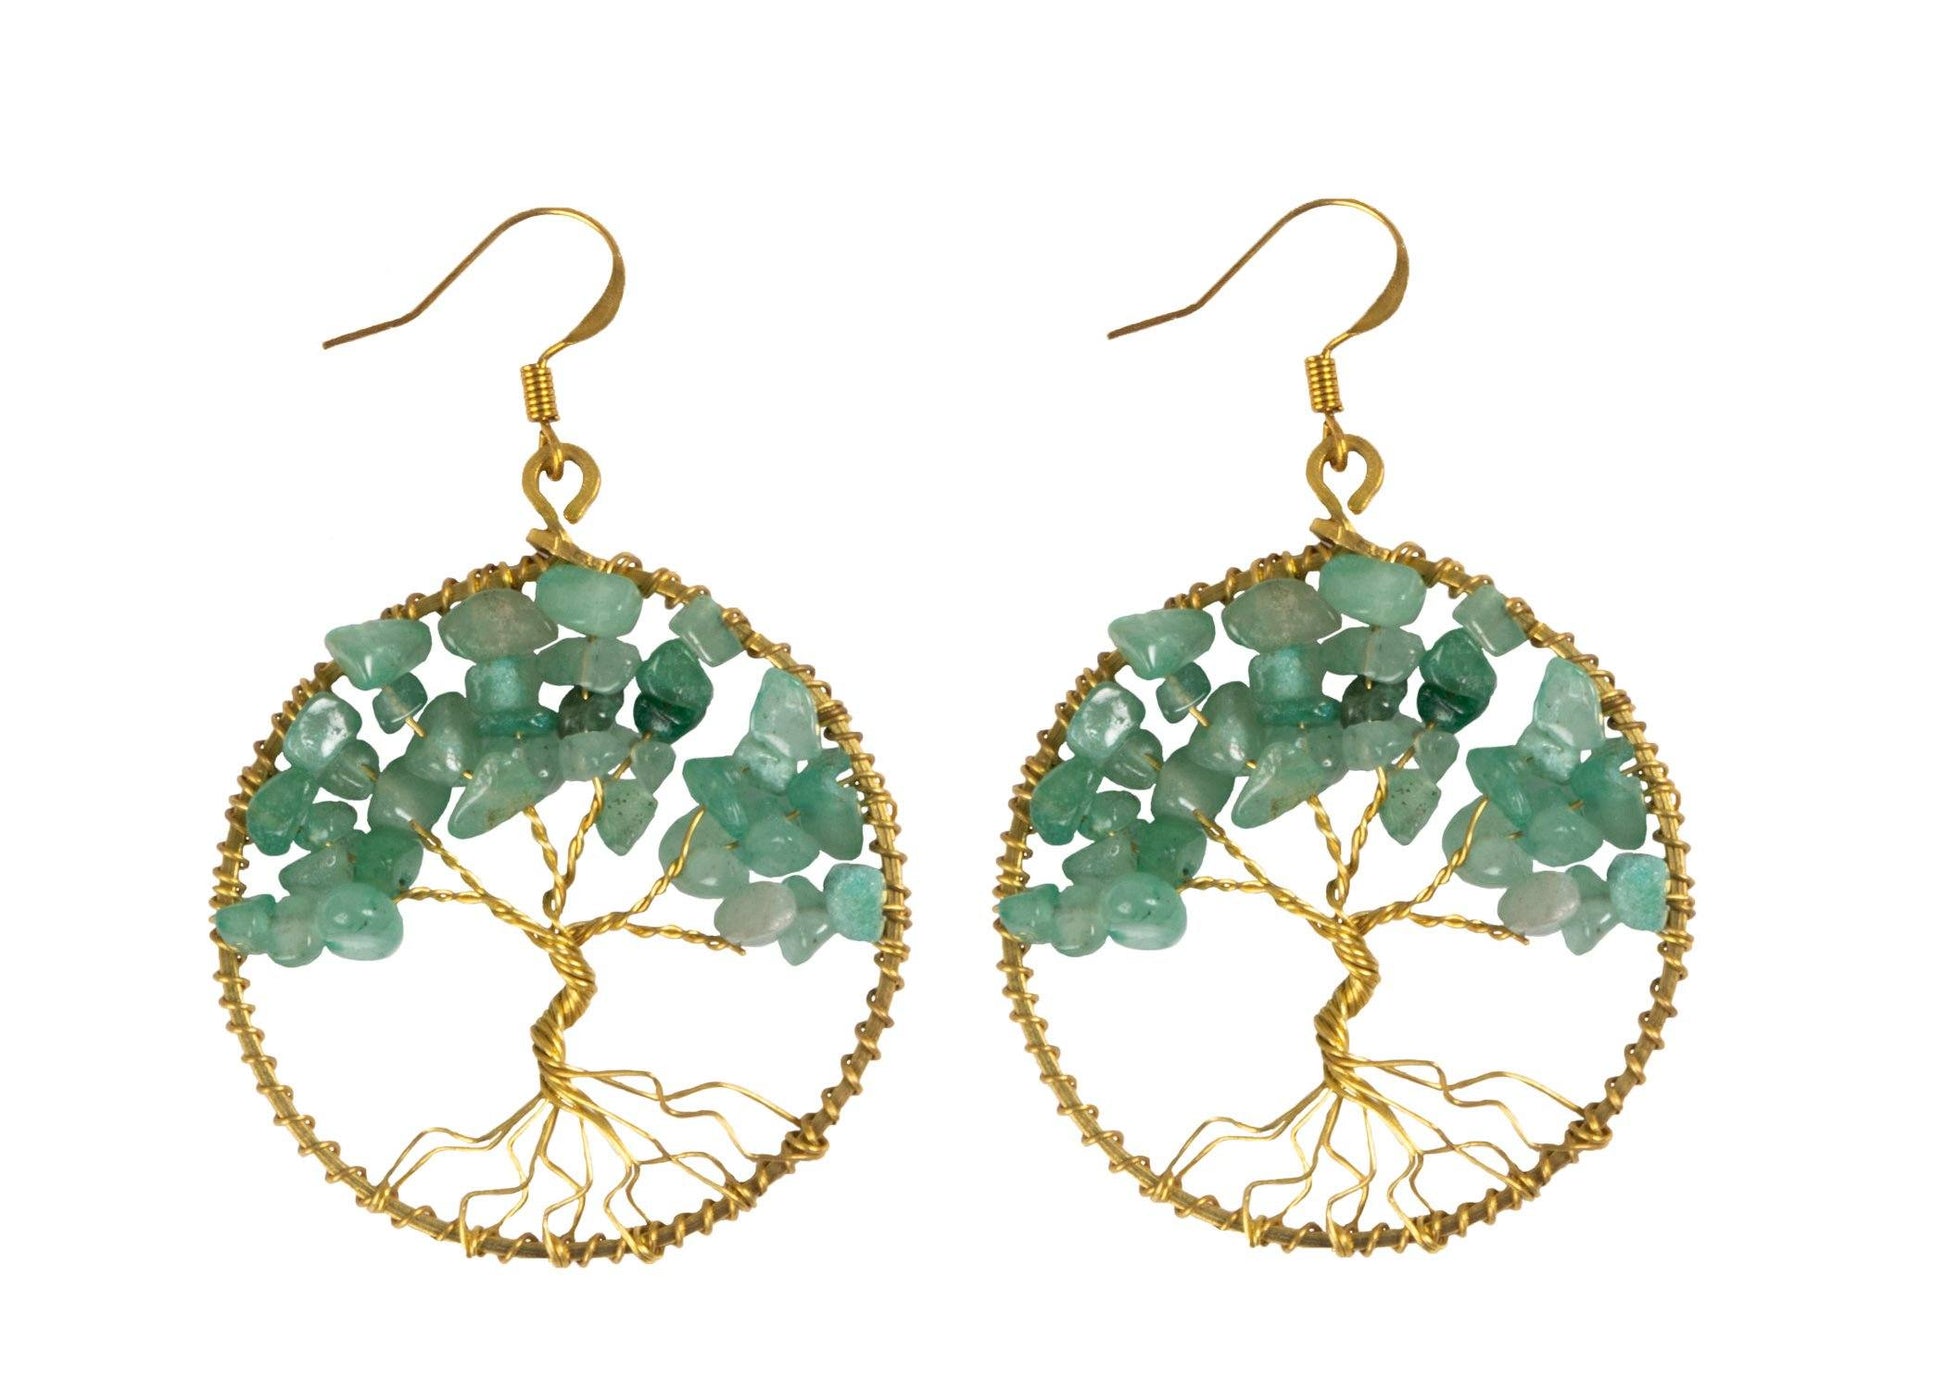 Handmade Earring Tree of Life Brass Circle Shape with Bead, Crystal and Stone - CCCollections